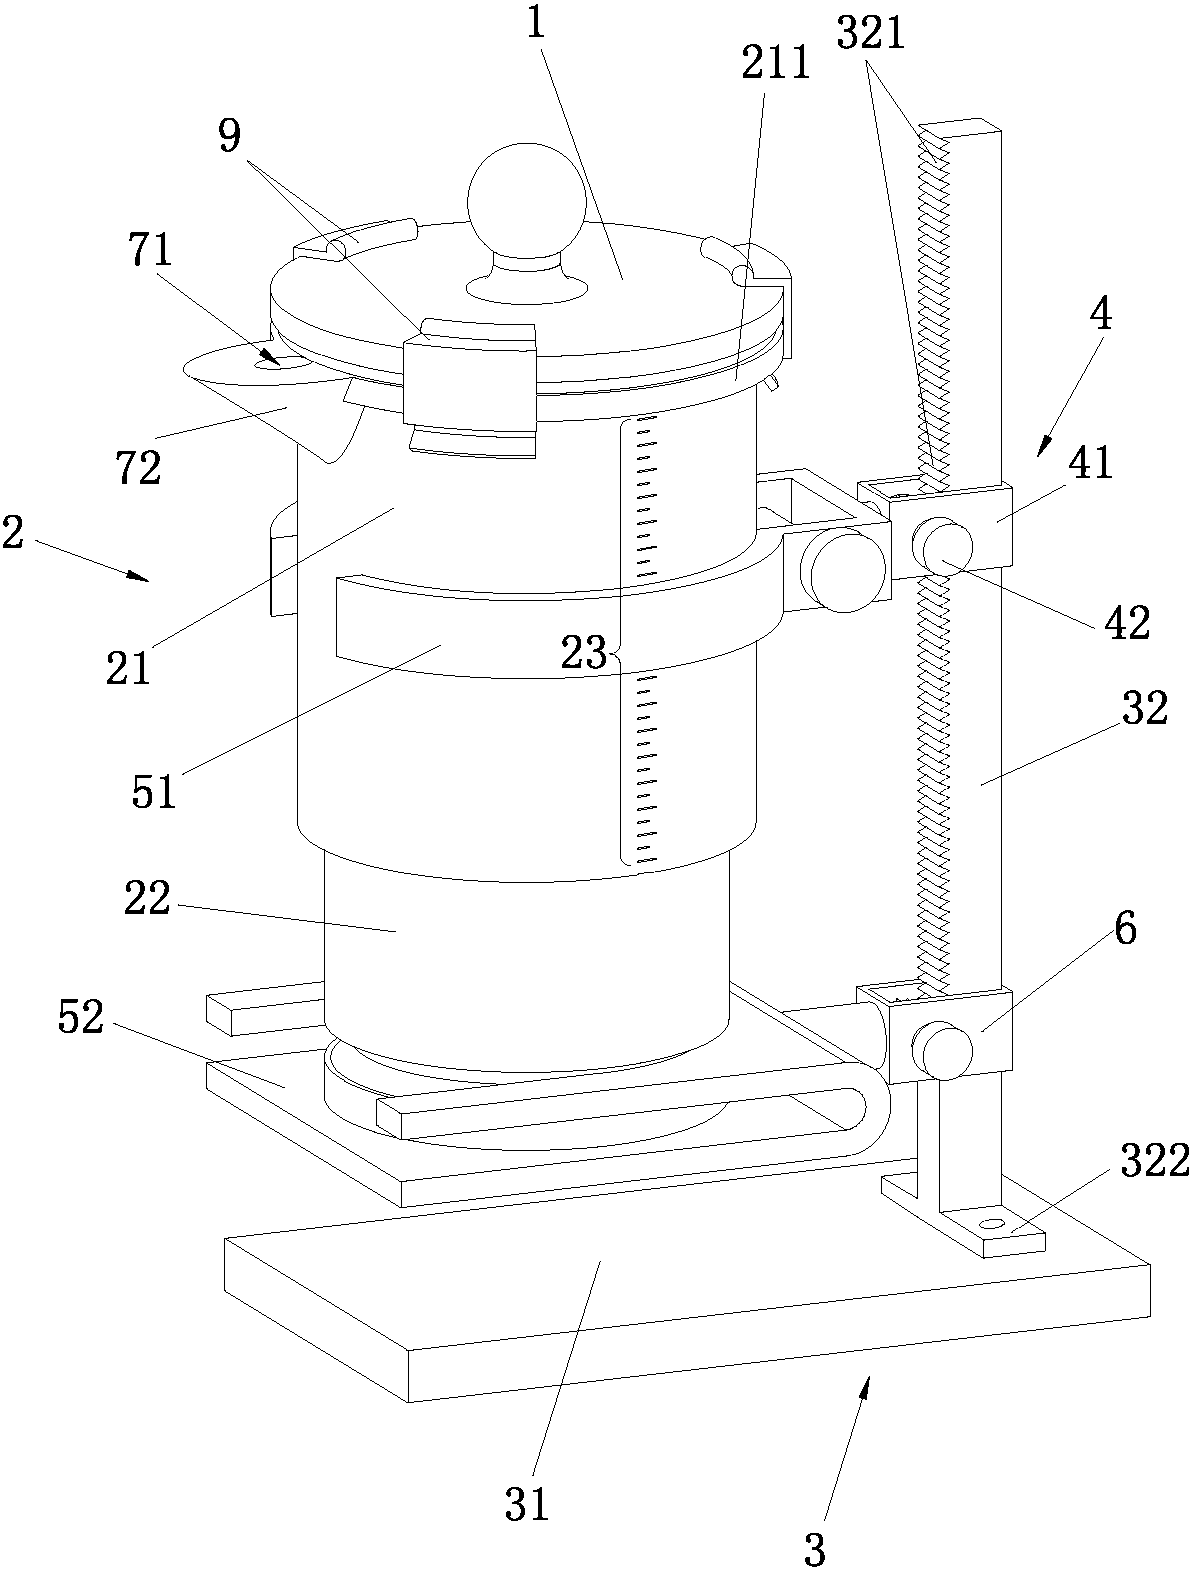 One-side soaking device for food contact materials